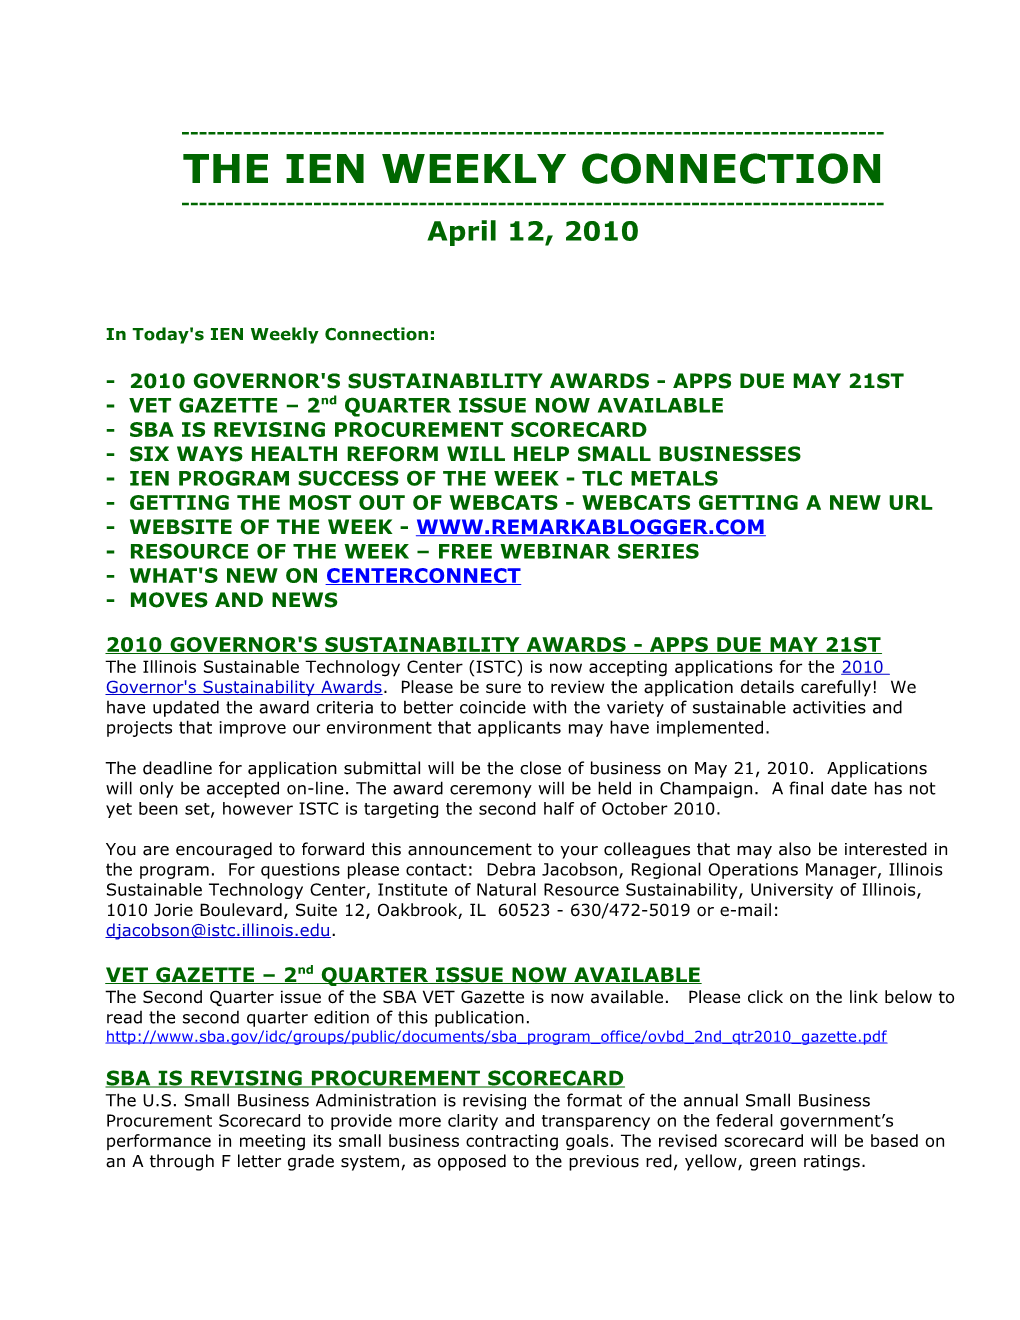 In Today'sien Weekly Connection s2